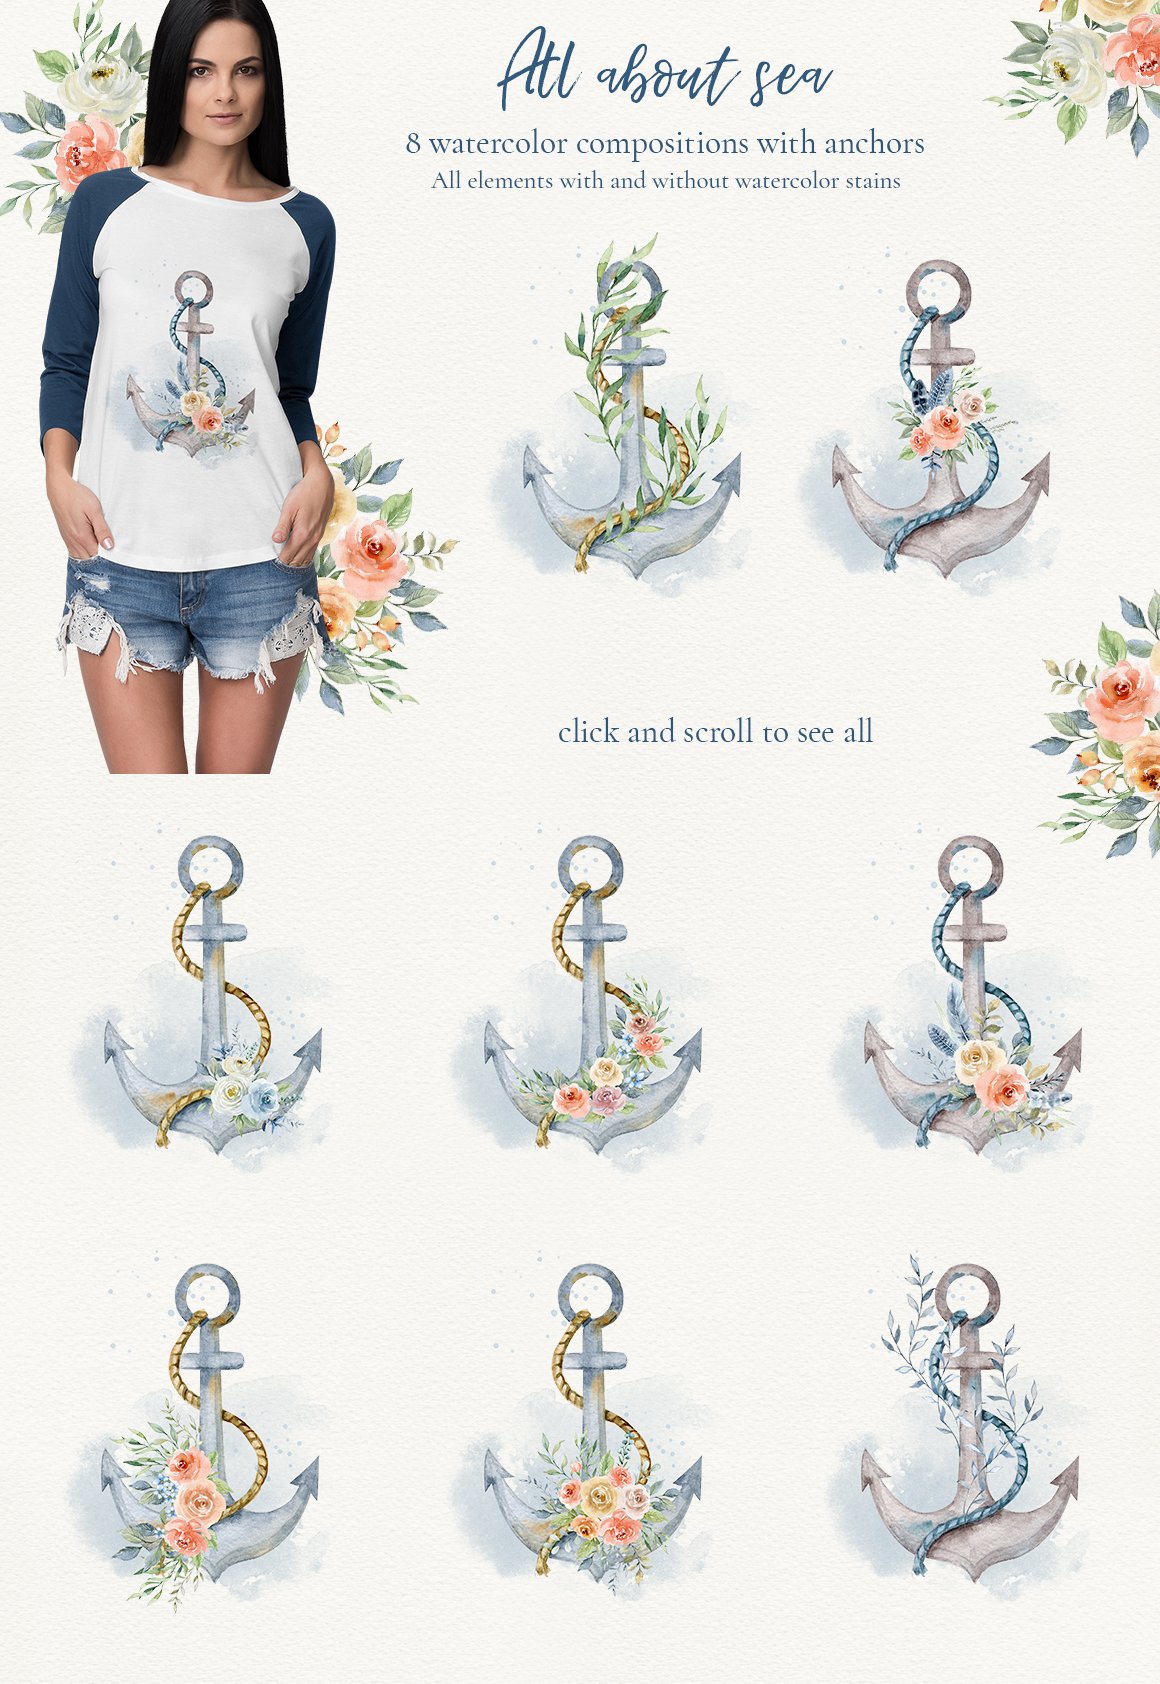 8 watercolor compositions with anchors.